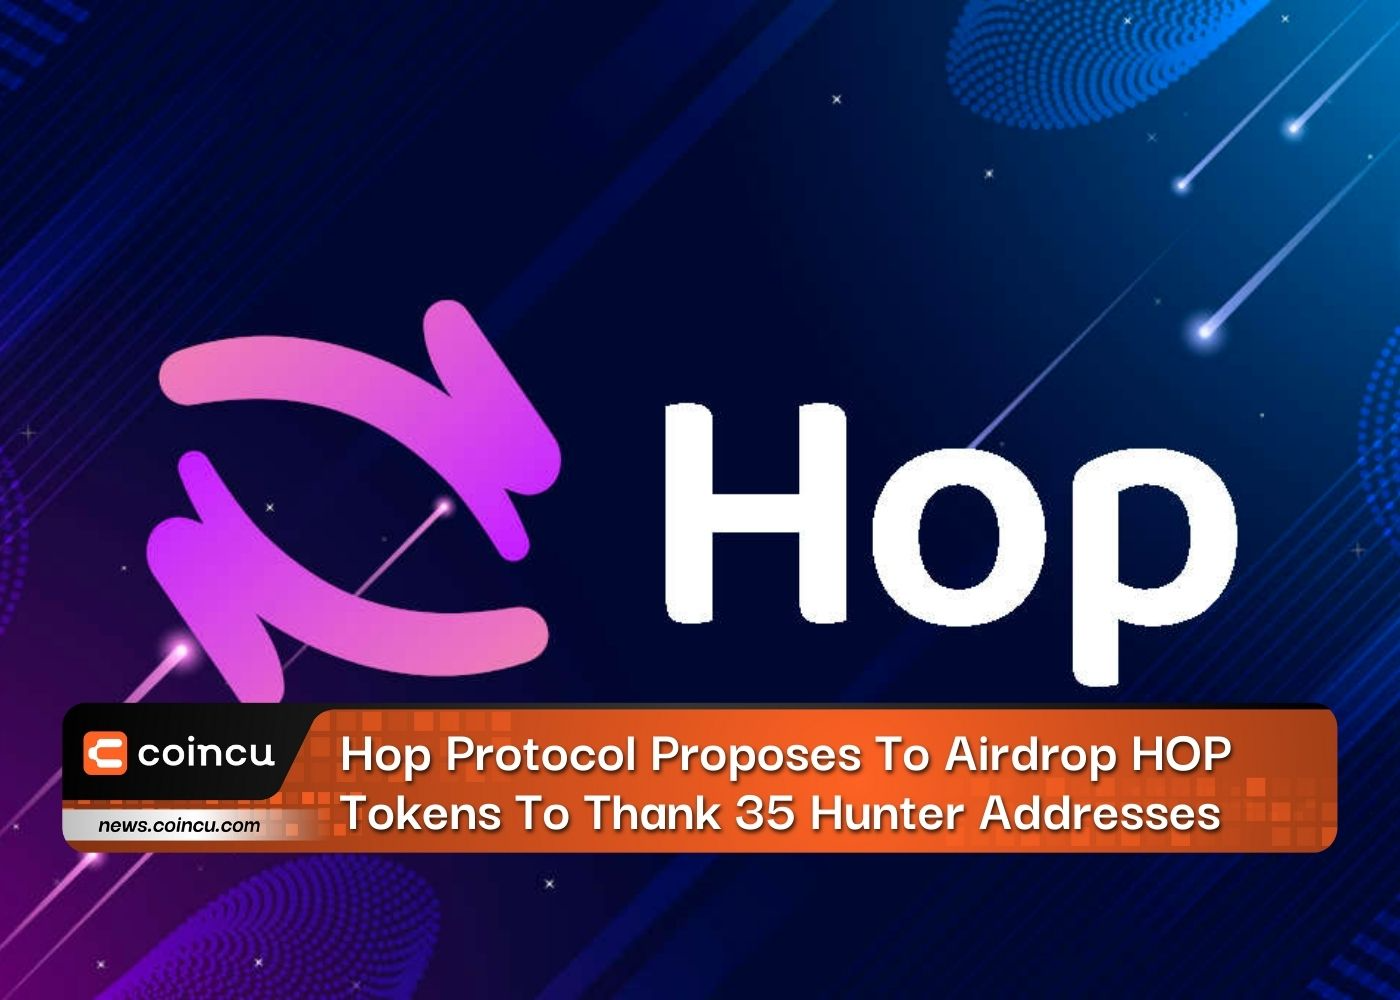 Hop Protocol Proposes To Airdrop HOP Tokens To Thank 35 Hunter Addresses